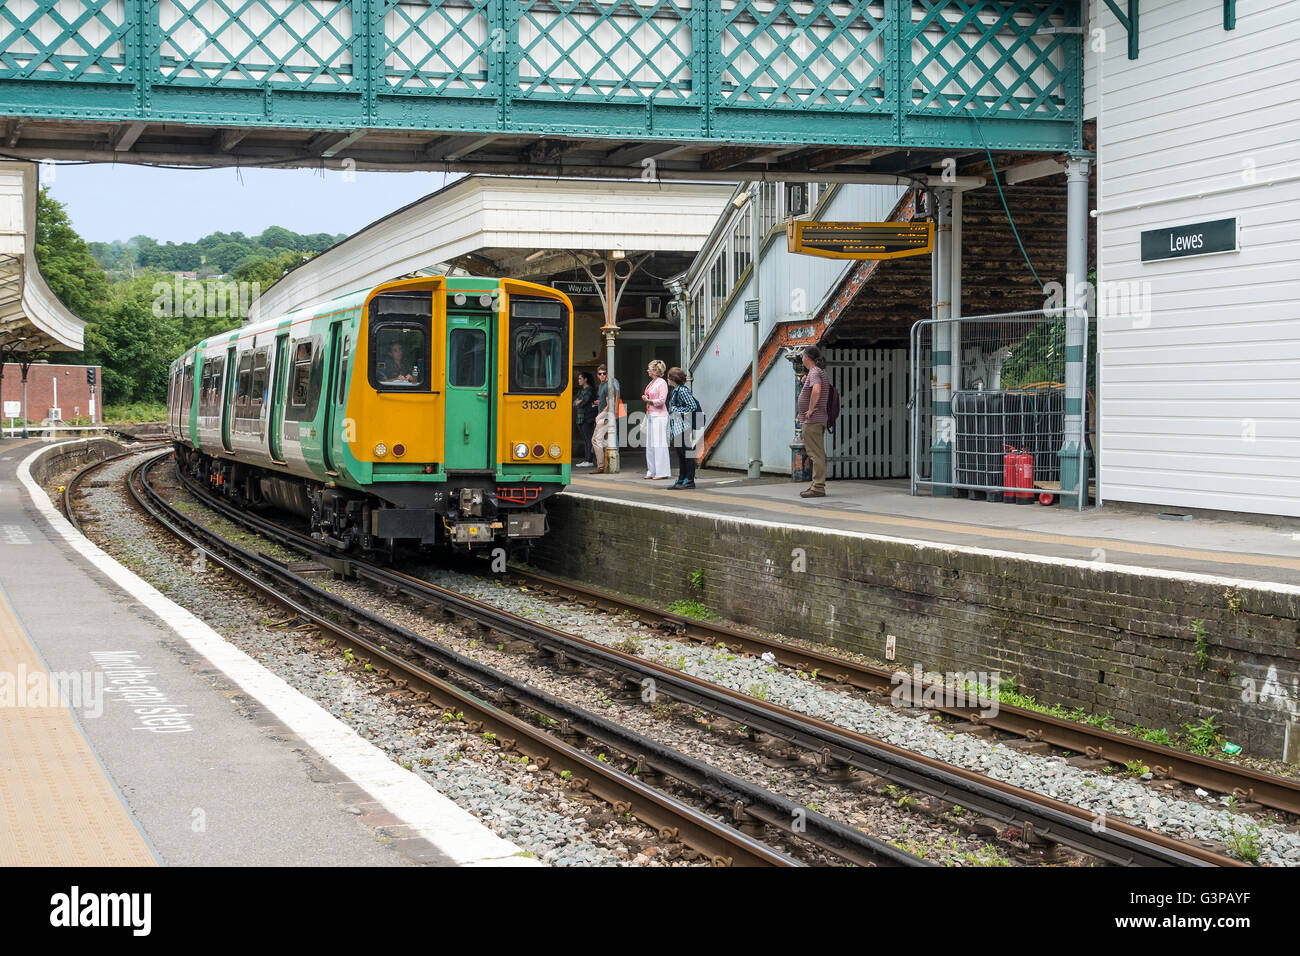 Southern Rail Train Arriving Lewes Station Sussex England UK Stock Photo